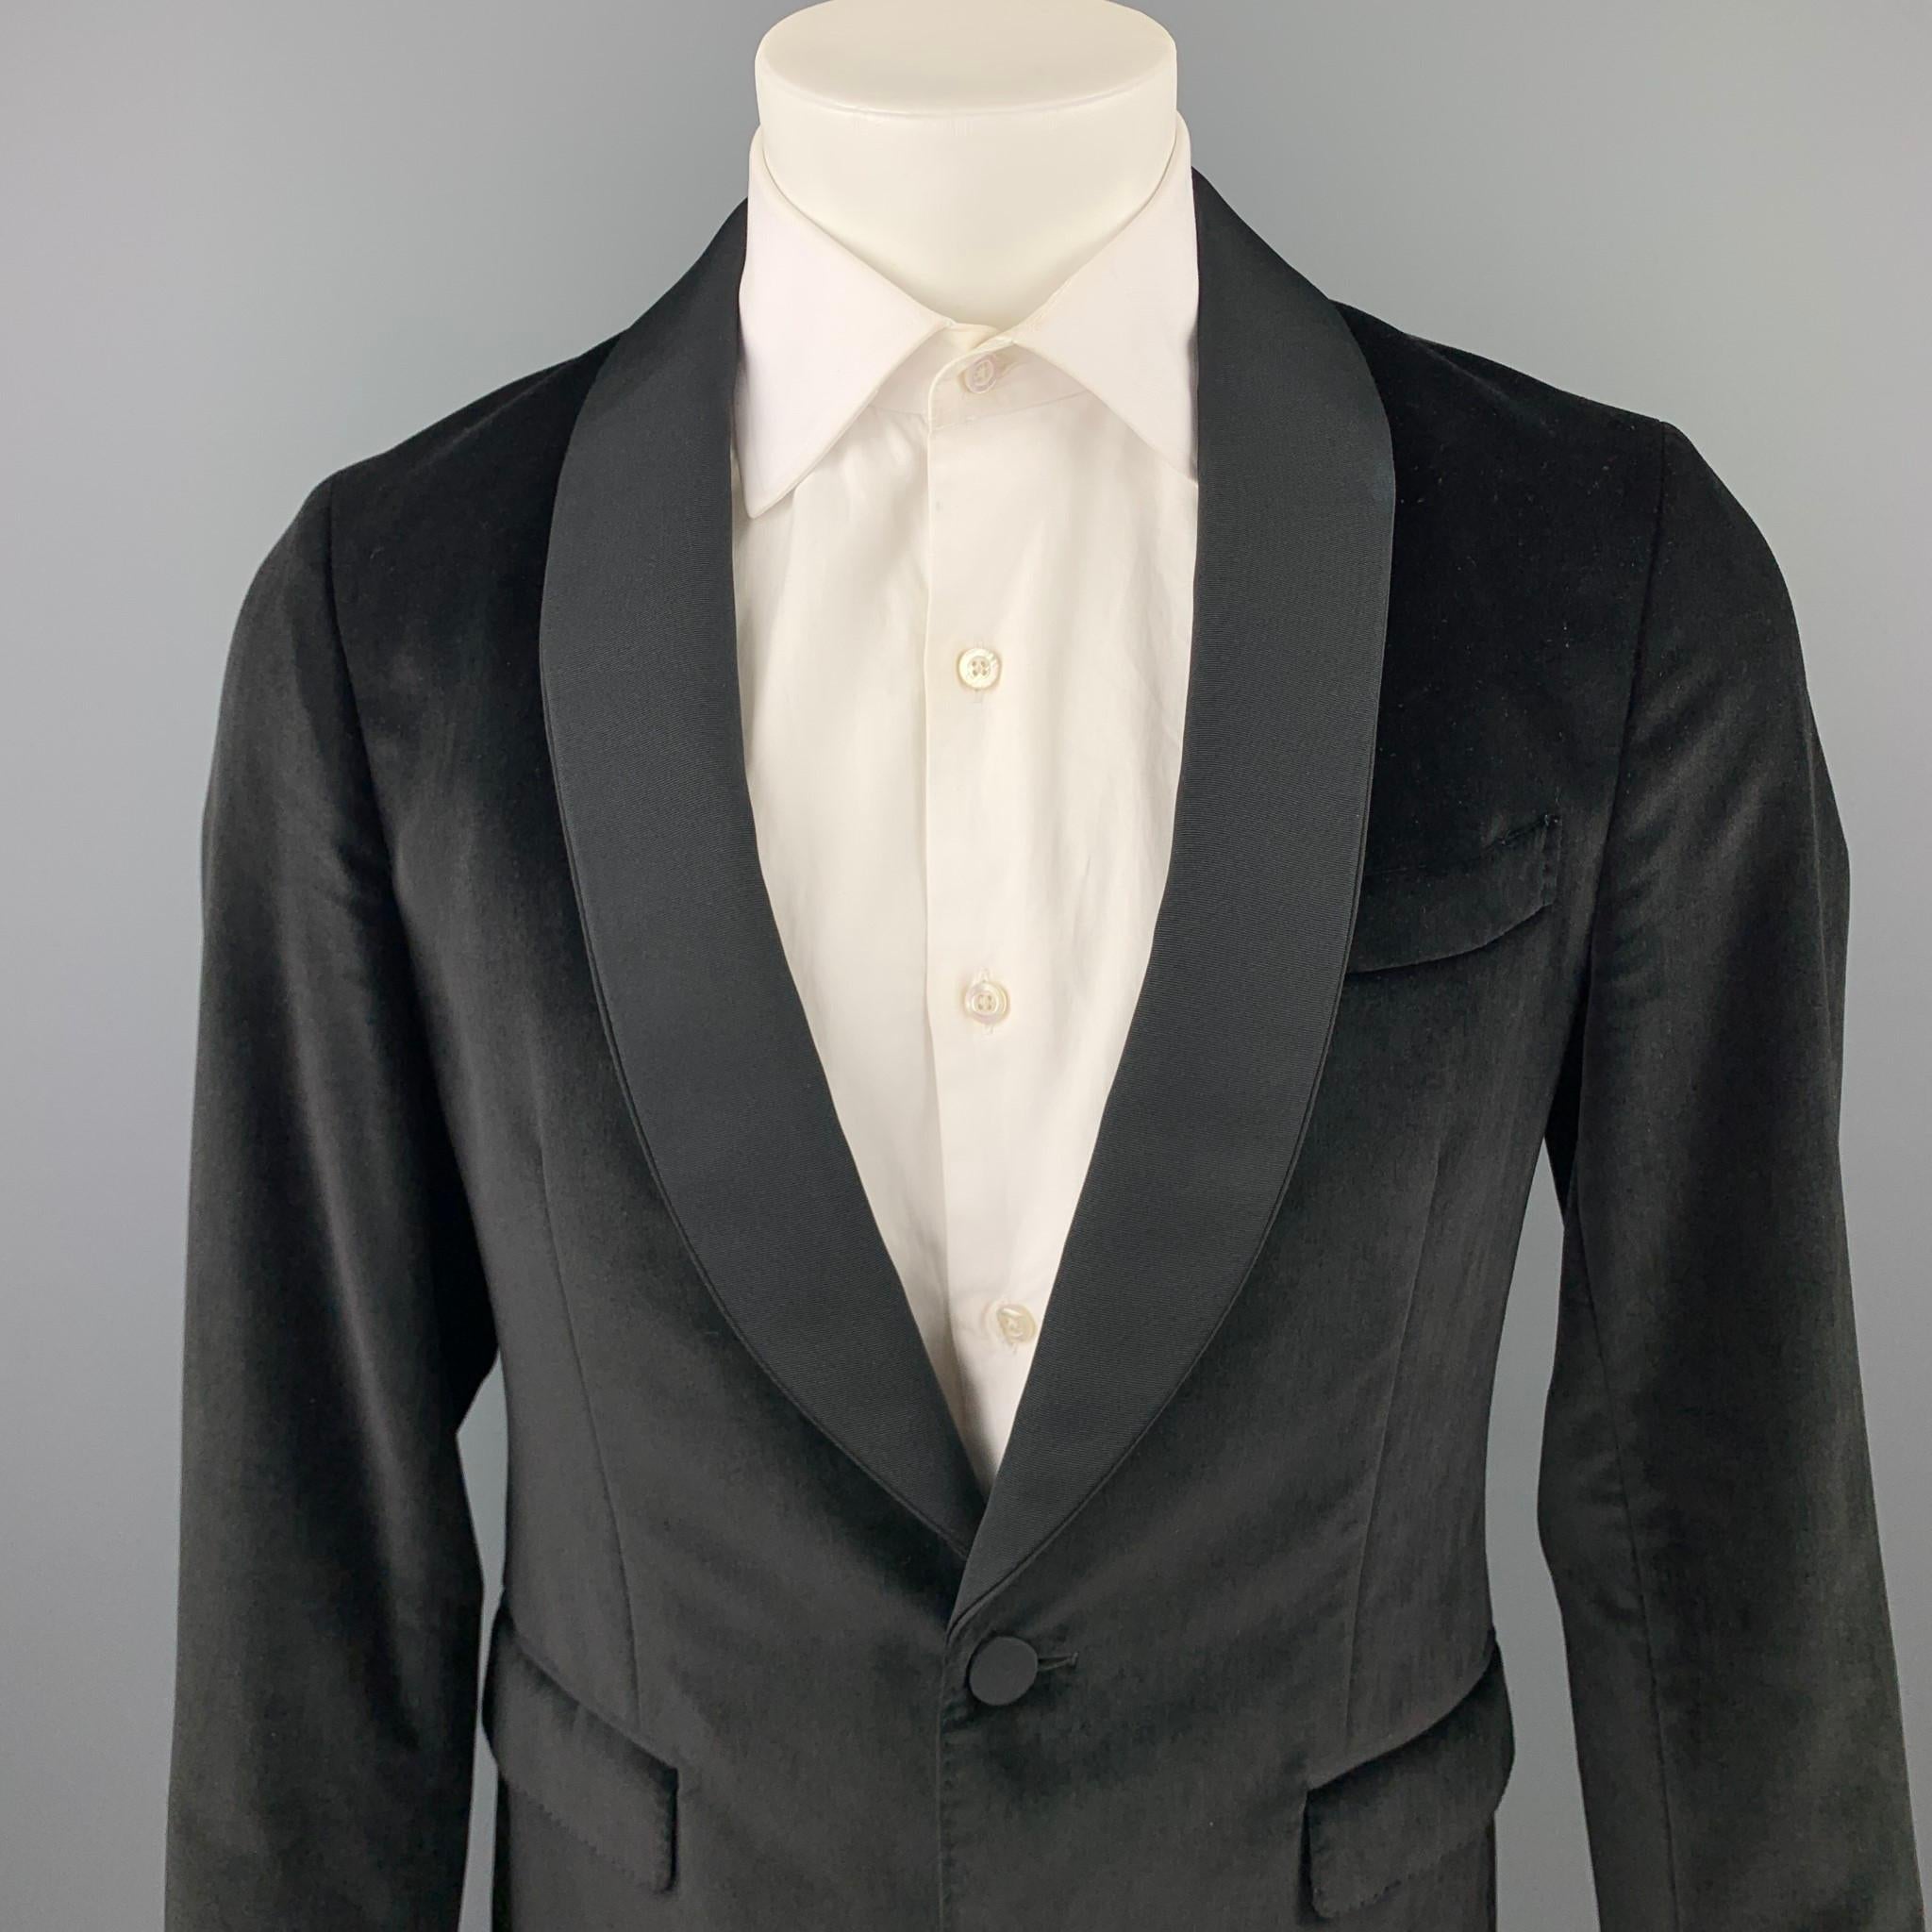 GUCCI sport coat comes in a black velvet with a full liner featuring a shawl collar, flap pockets, and a single button closure. Made in Italy.

Excellent Pre-Owned Condition.
Marked: IT 48 R 

Measurements:

Shoulder: 16.5 in. 
Chest: 38 in.